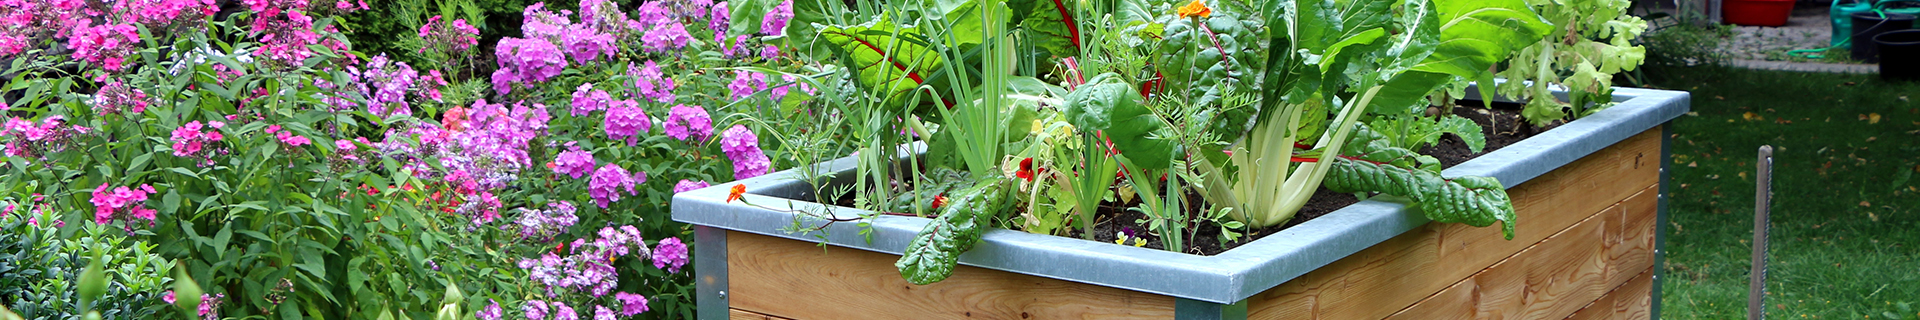 <p>How to make your own wicking beds</p>
